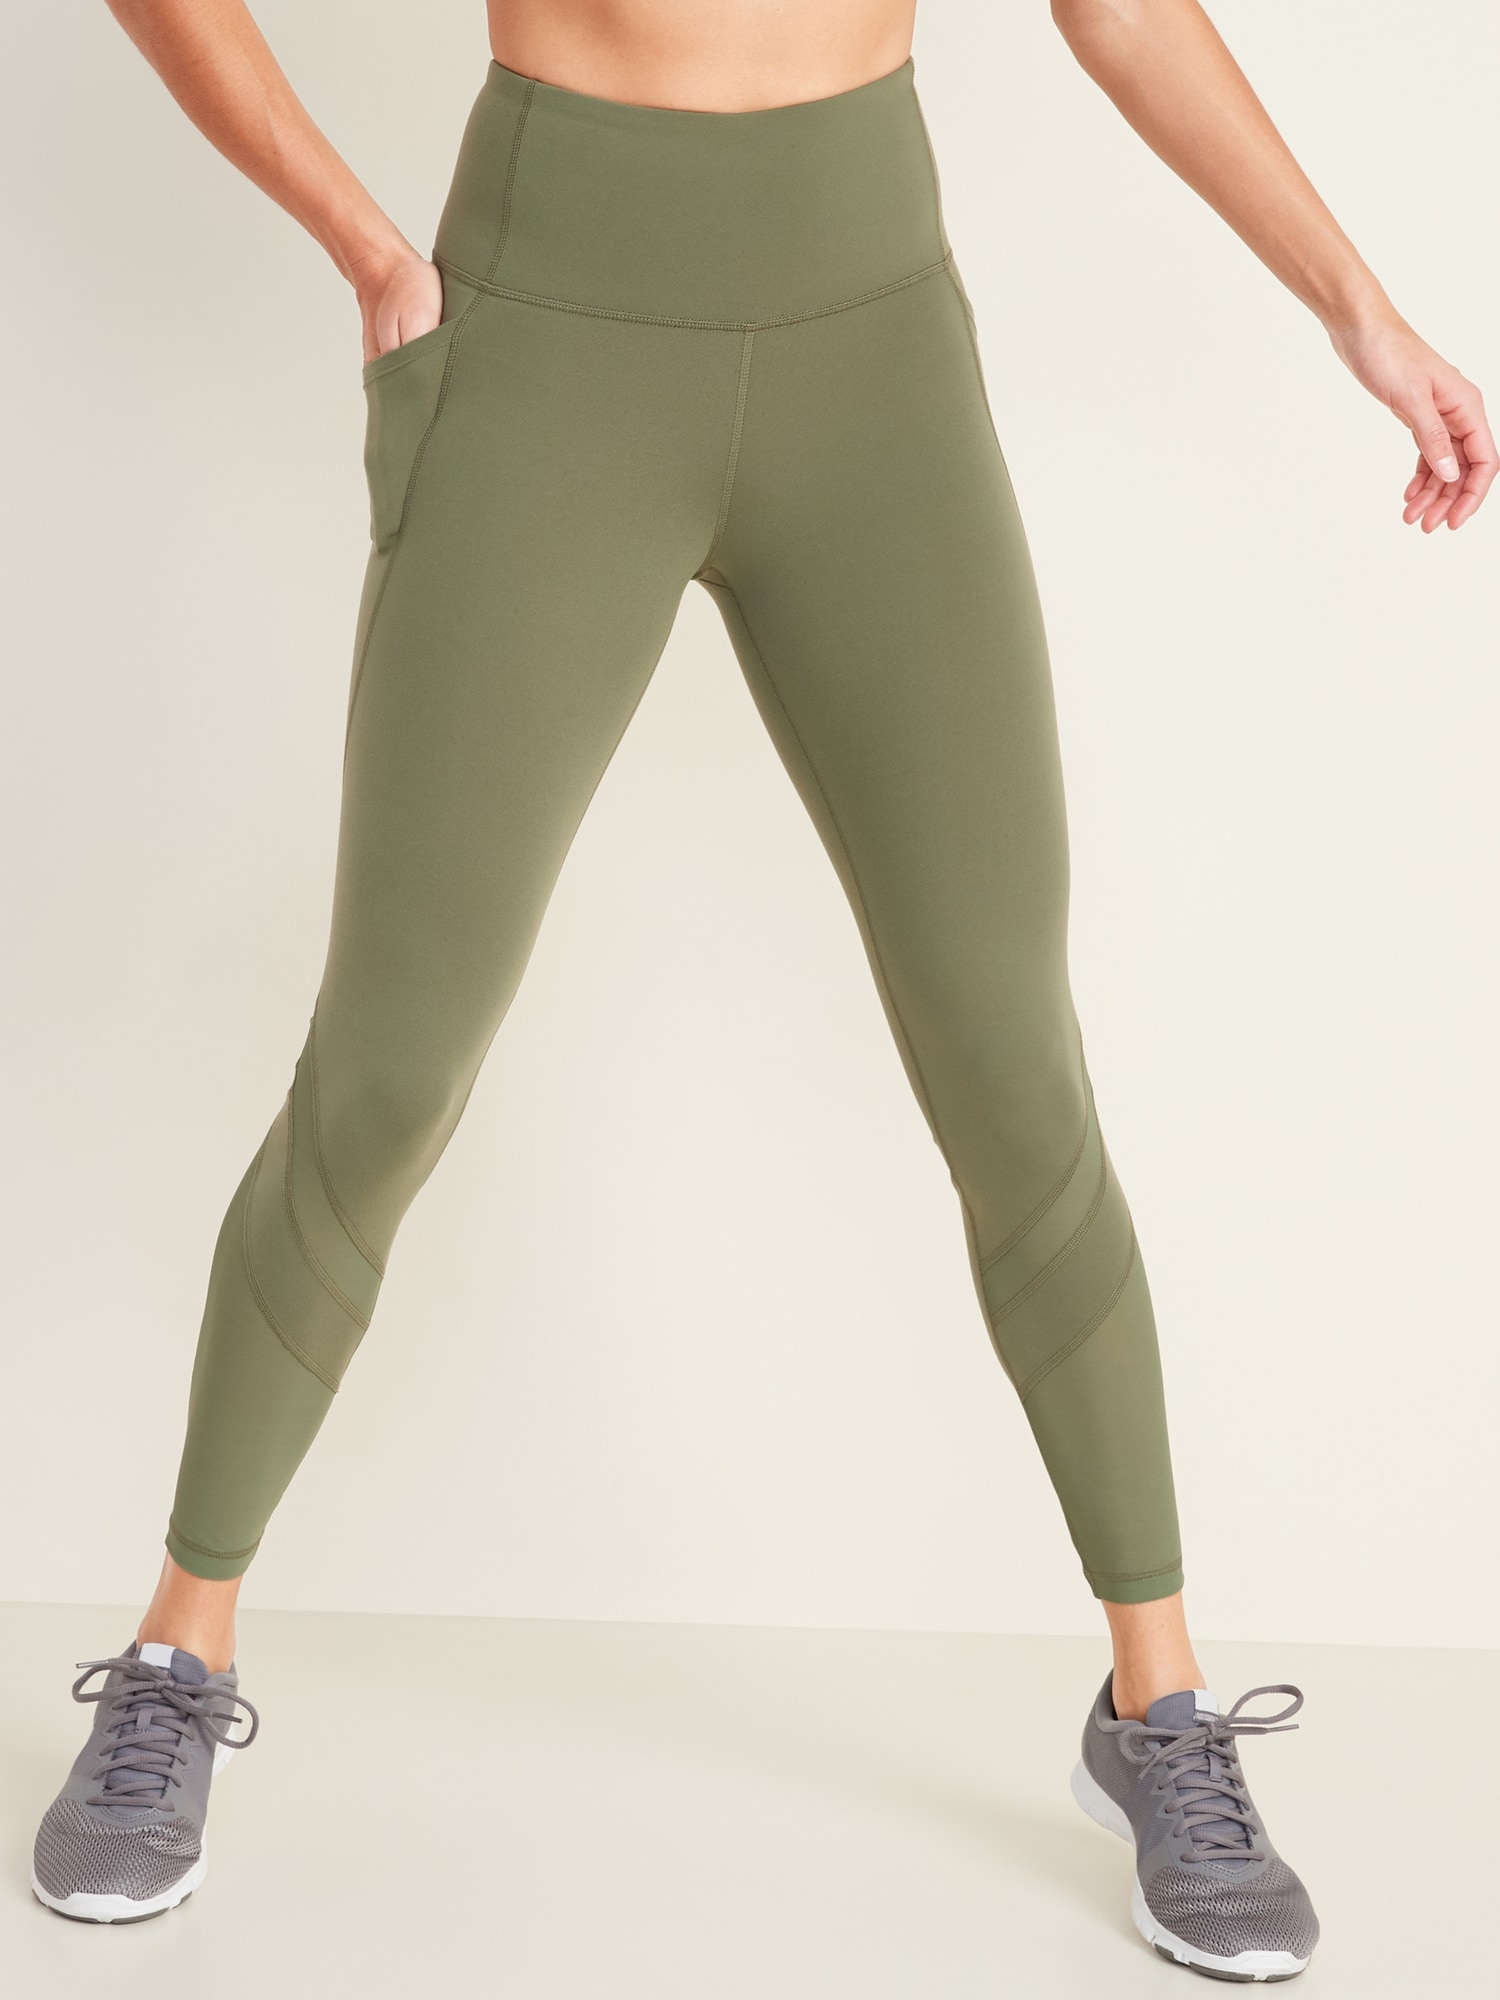 Old Navy Active Go Dry Athletic Leggings Side Pockets & Mesh Olive Green S